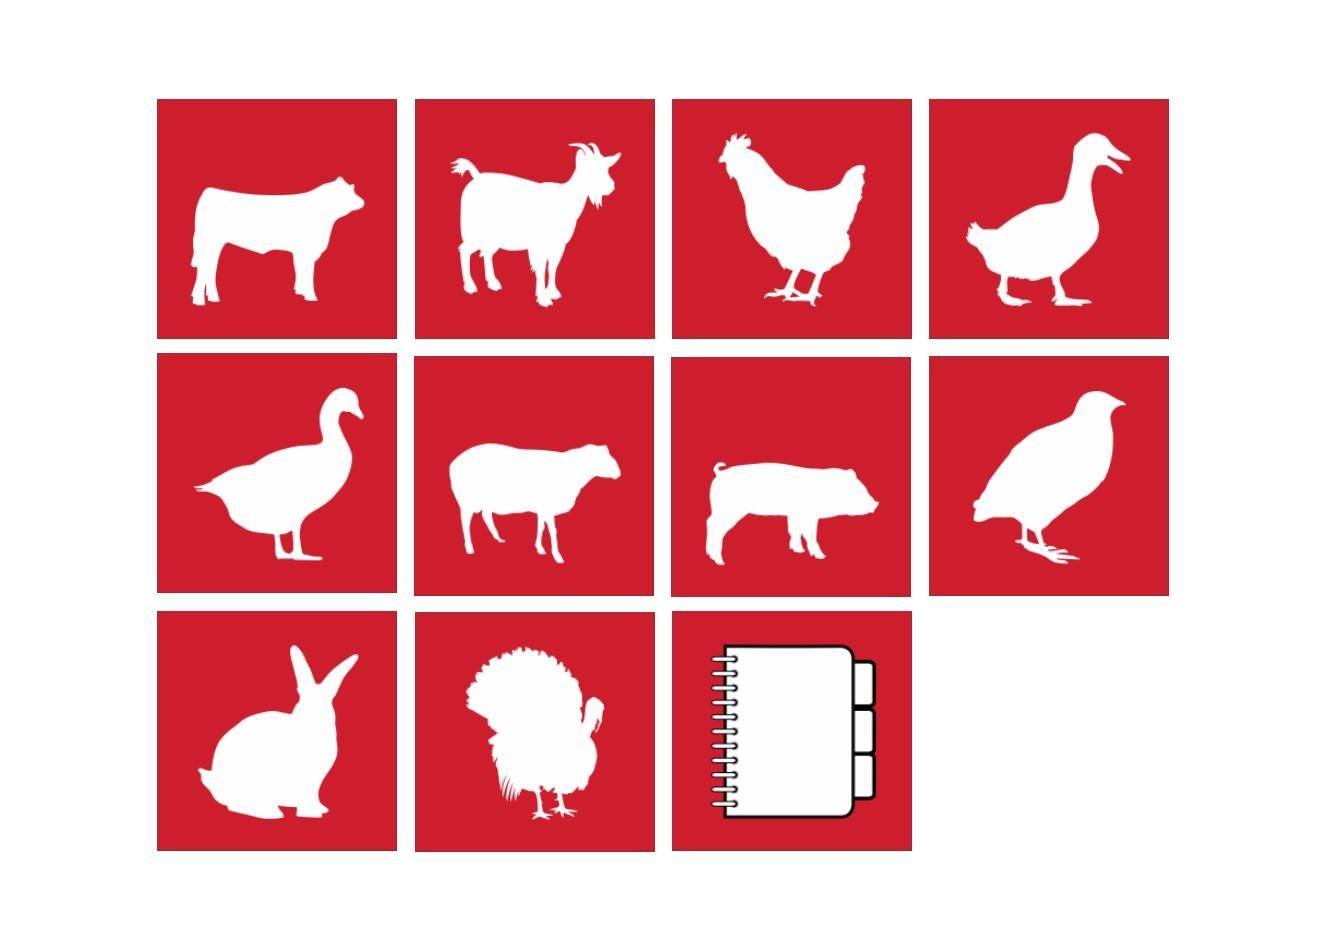 Maryland Niche Meats and Poultry Directory Dashboard